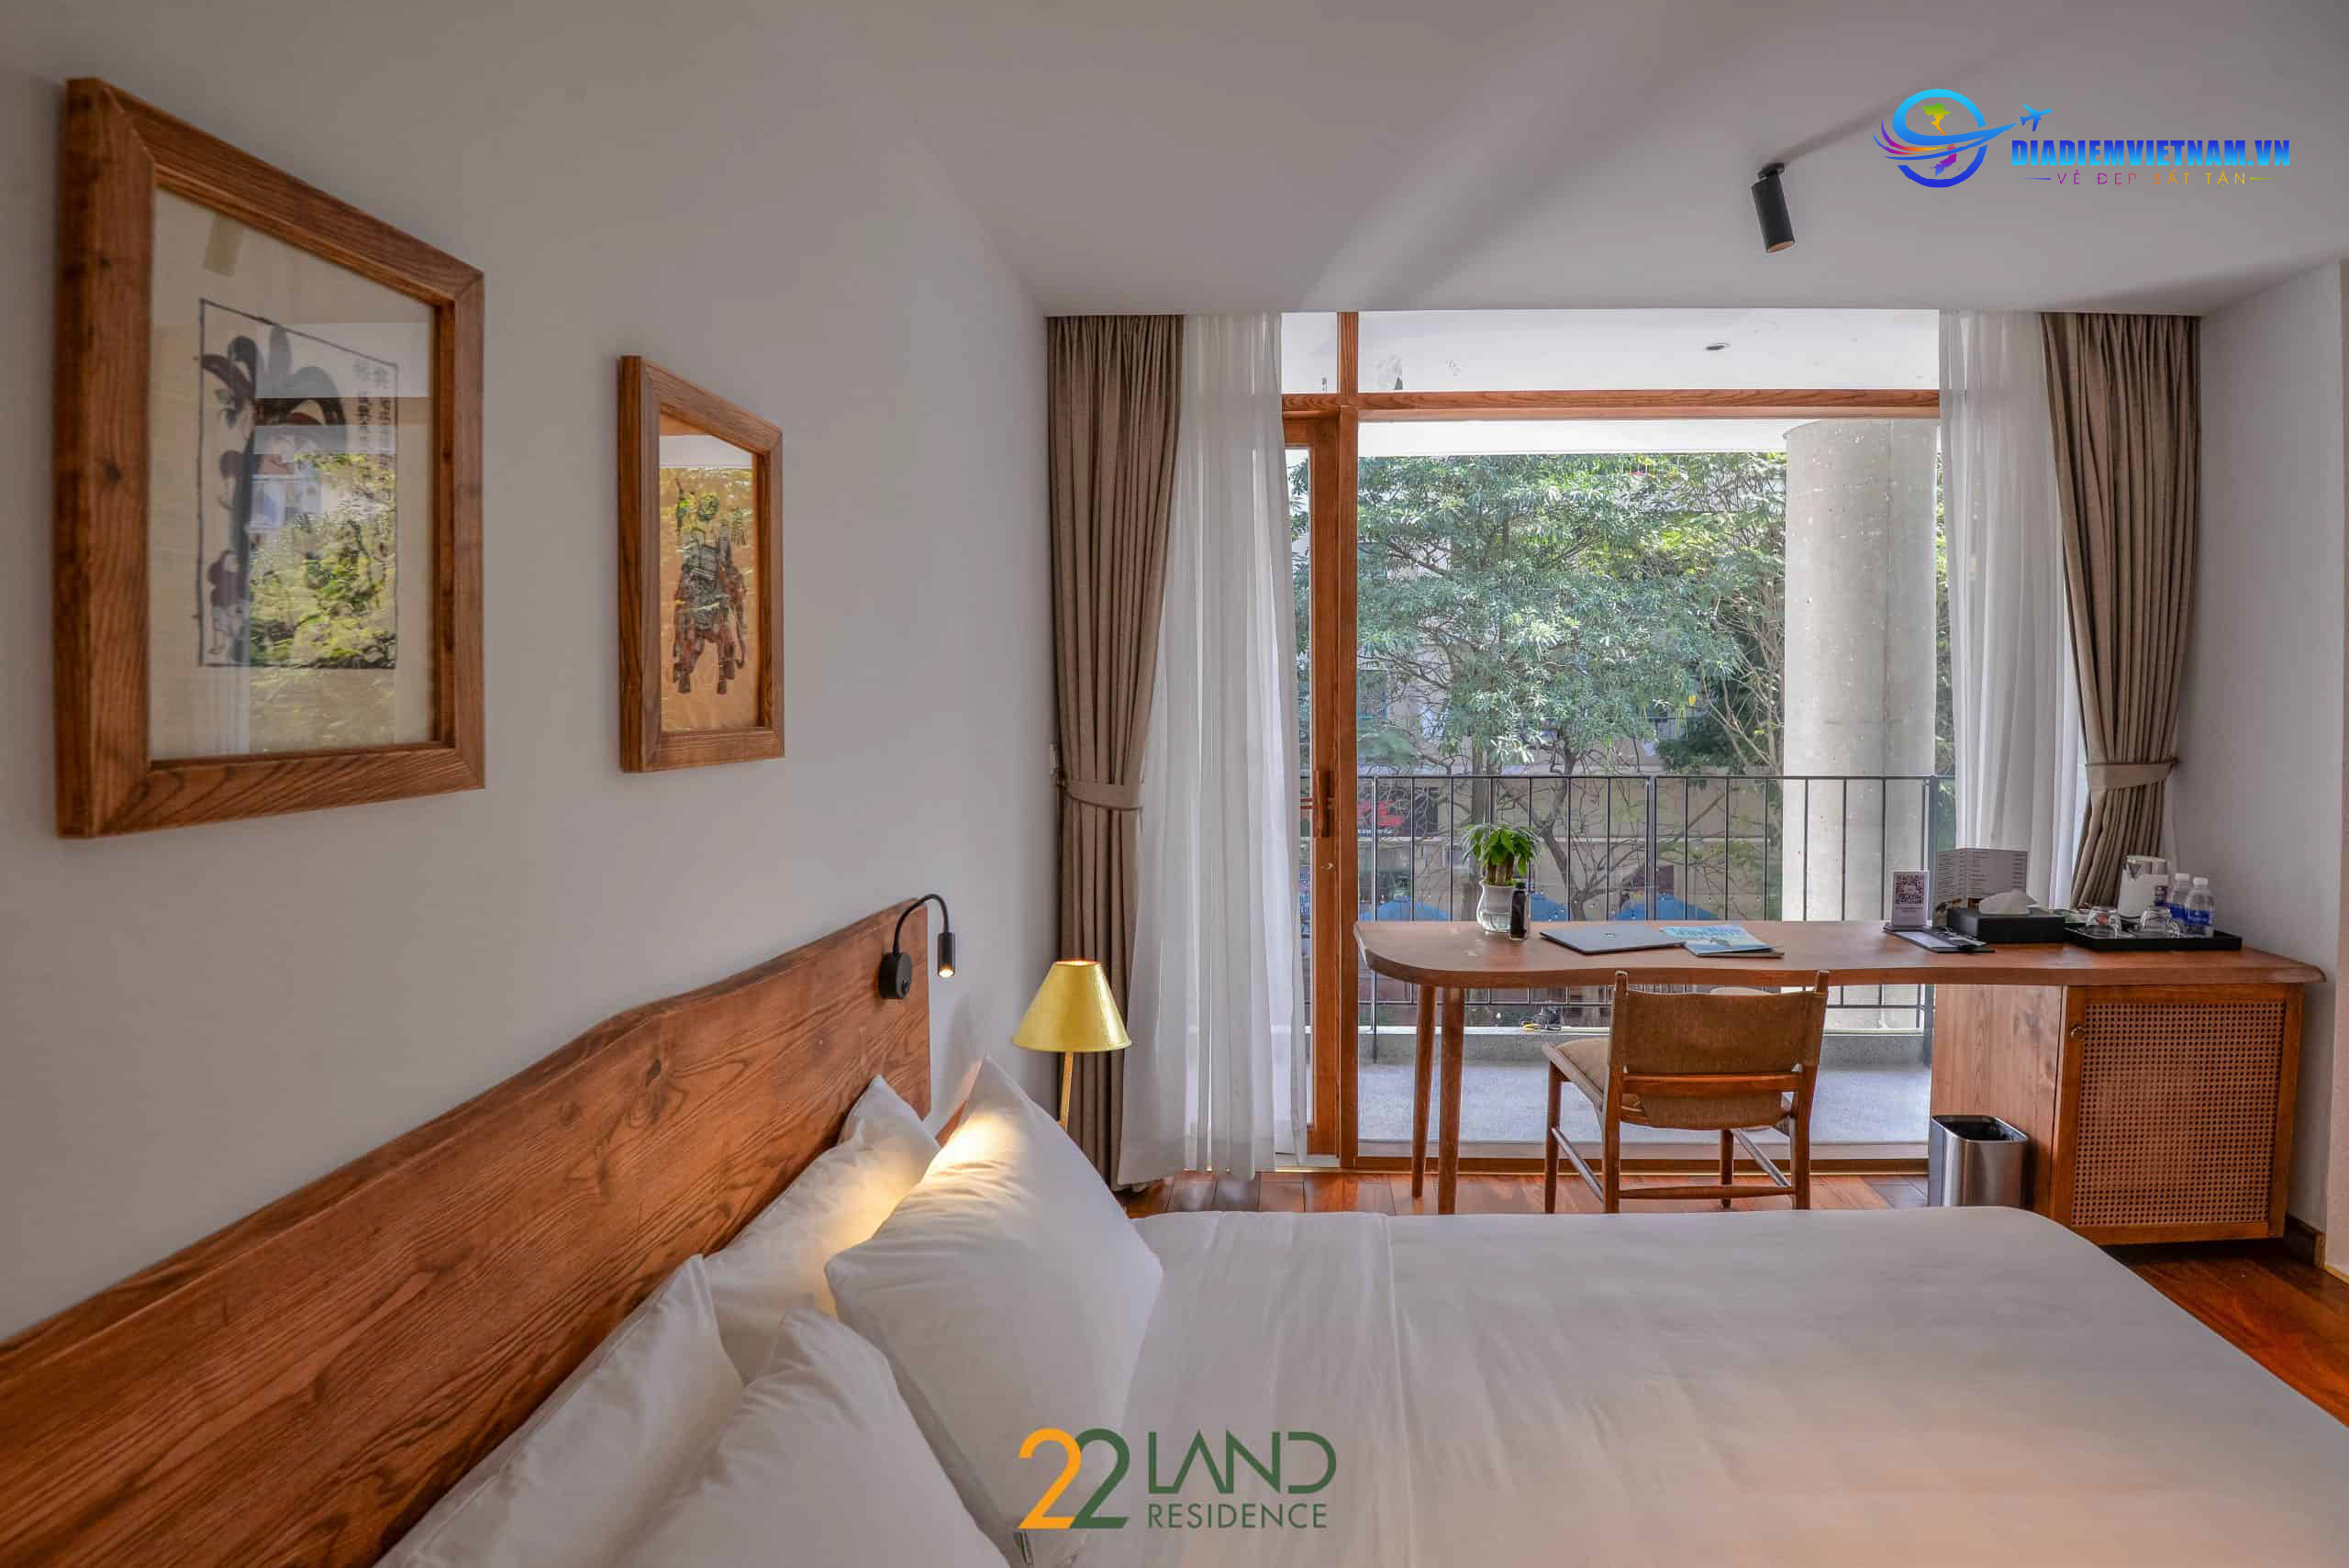 Phòng Junior Suite 22Land Residence Hotel & Spa